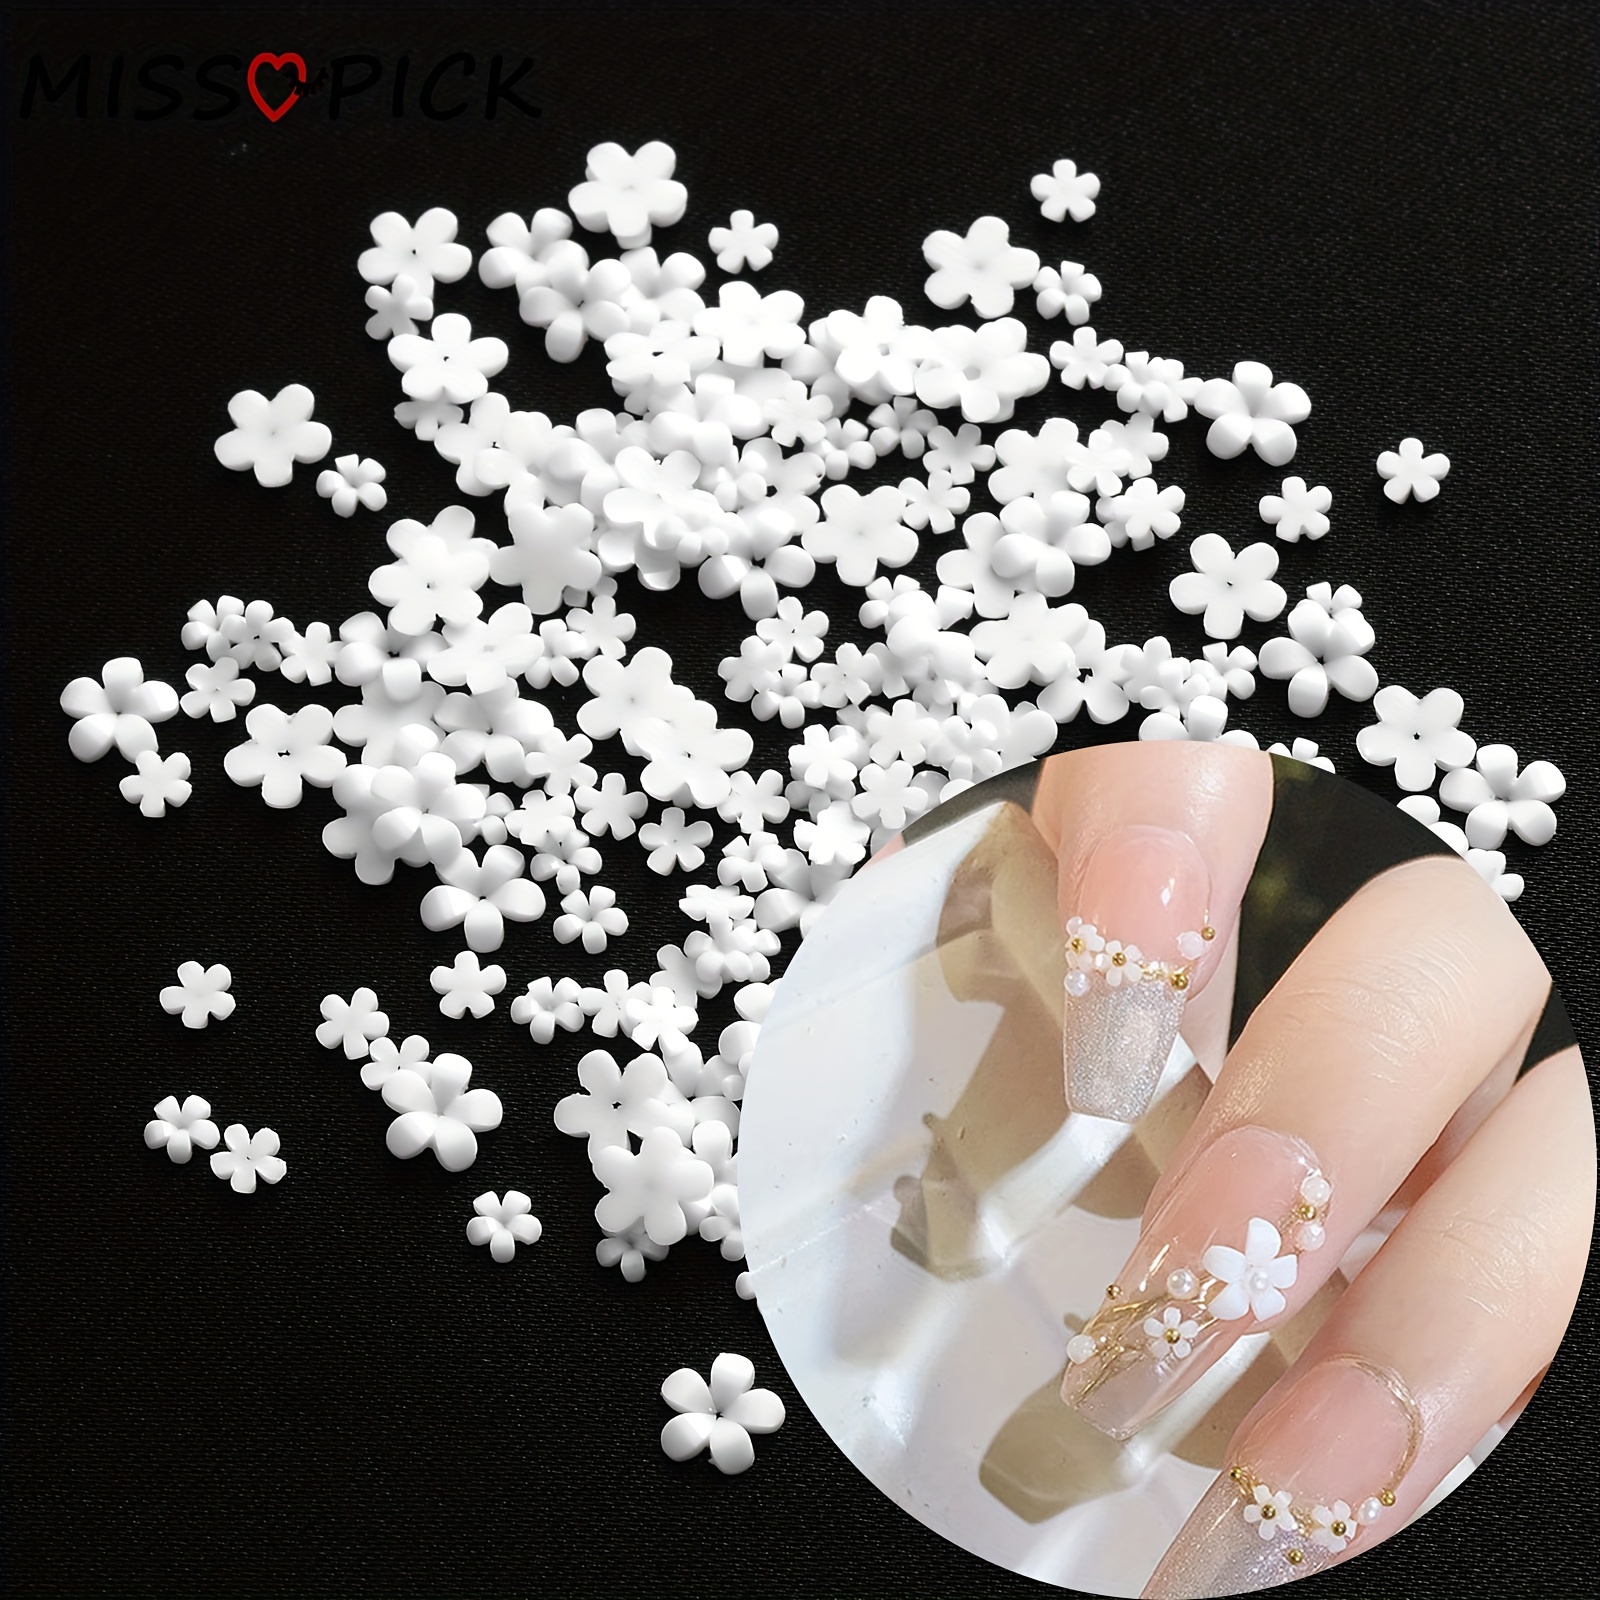 

500pcs 3mm/0.118in 7 Colors Acrylic Flower 3d Nail Art Decorations Mixed Sizes Beads For Nail Art Charms Accessories